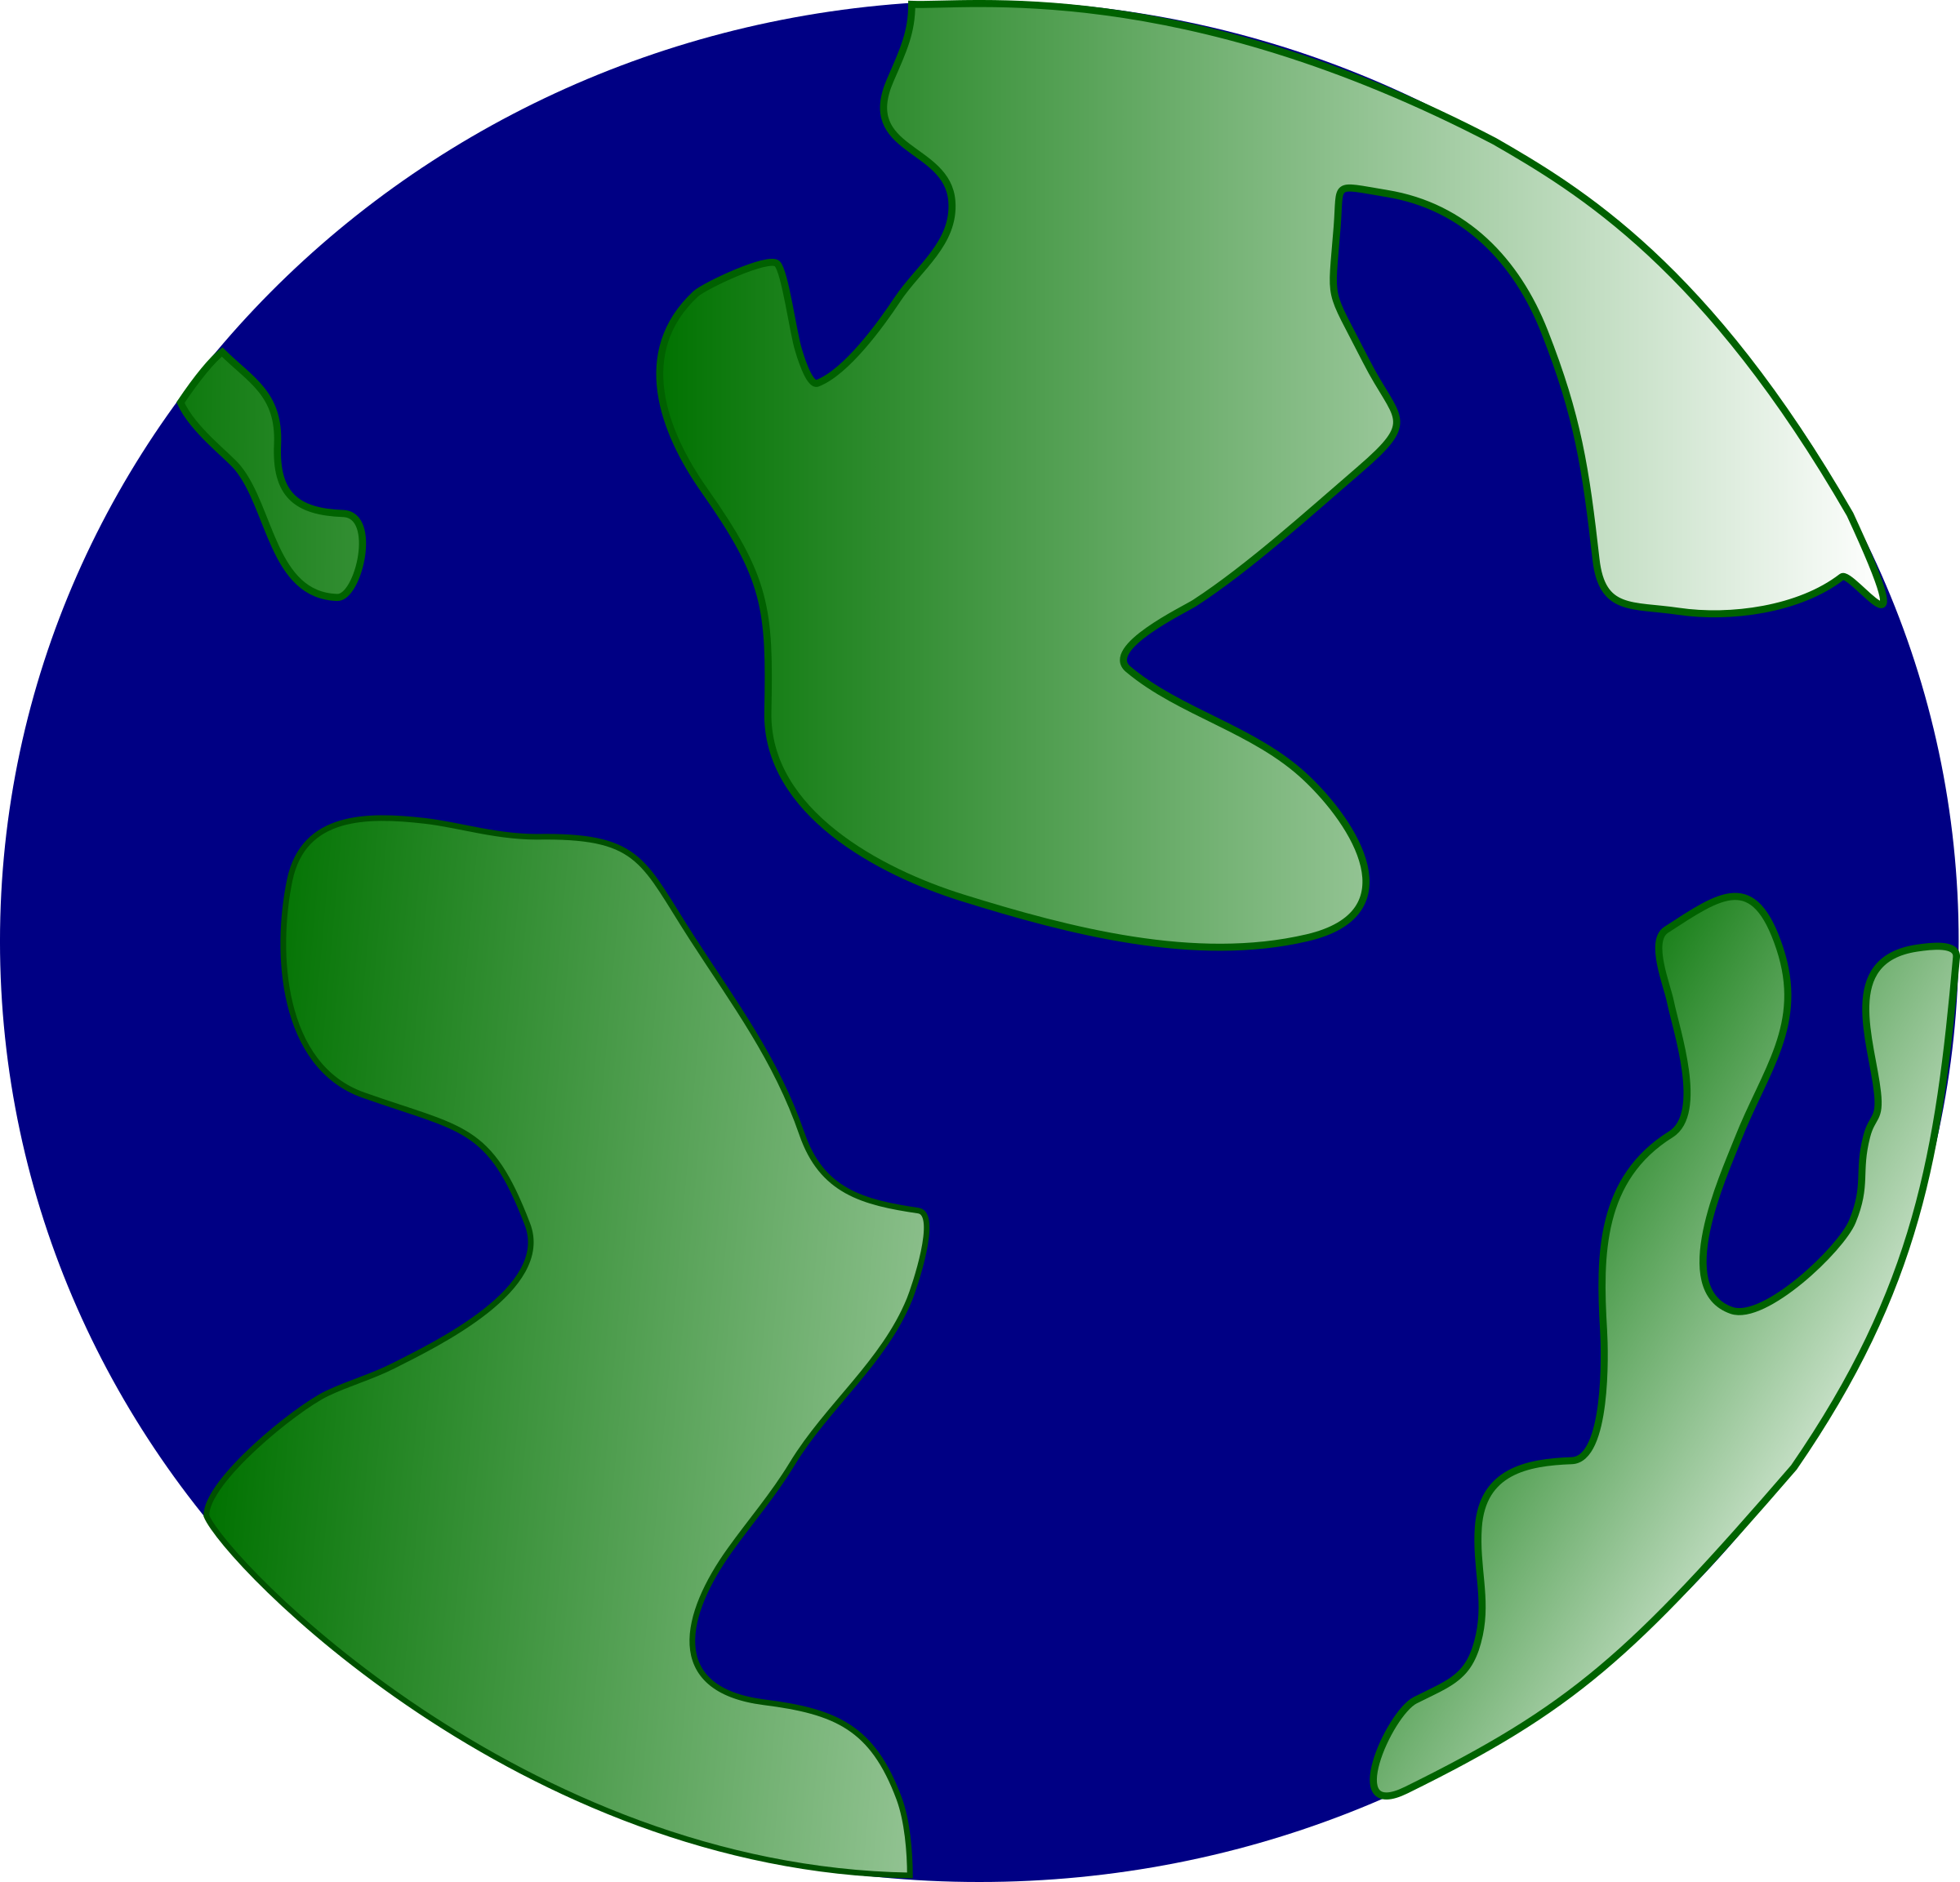 Globe clipart geography.